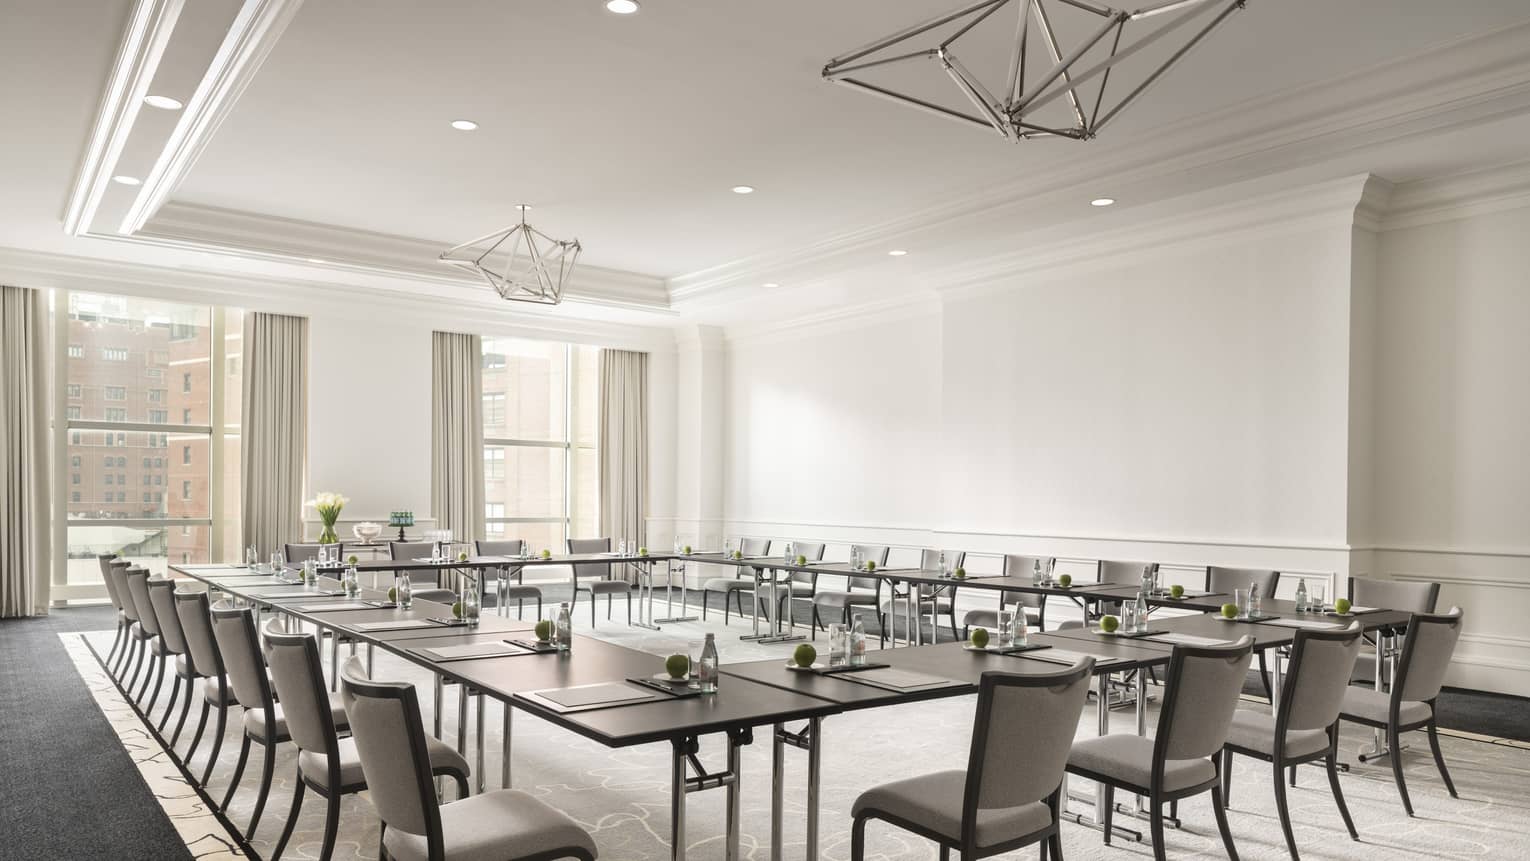 White conference room with dark tables in boardroom-style seating